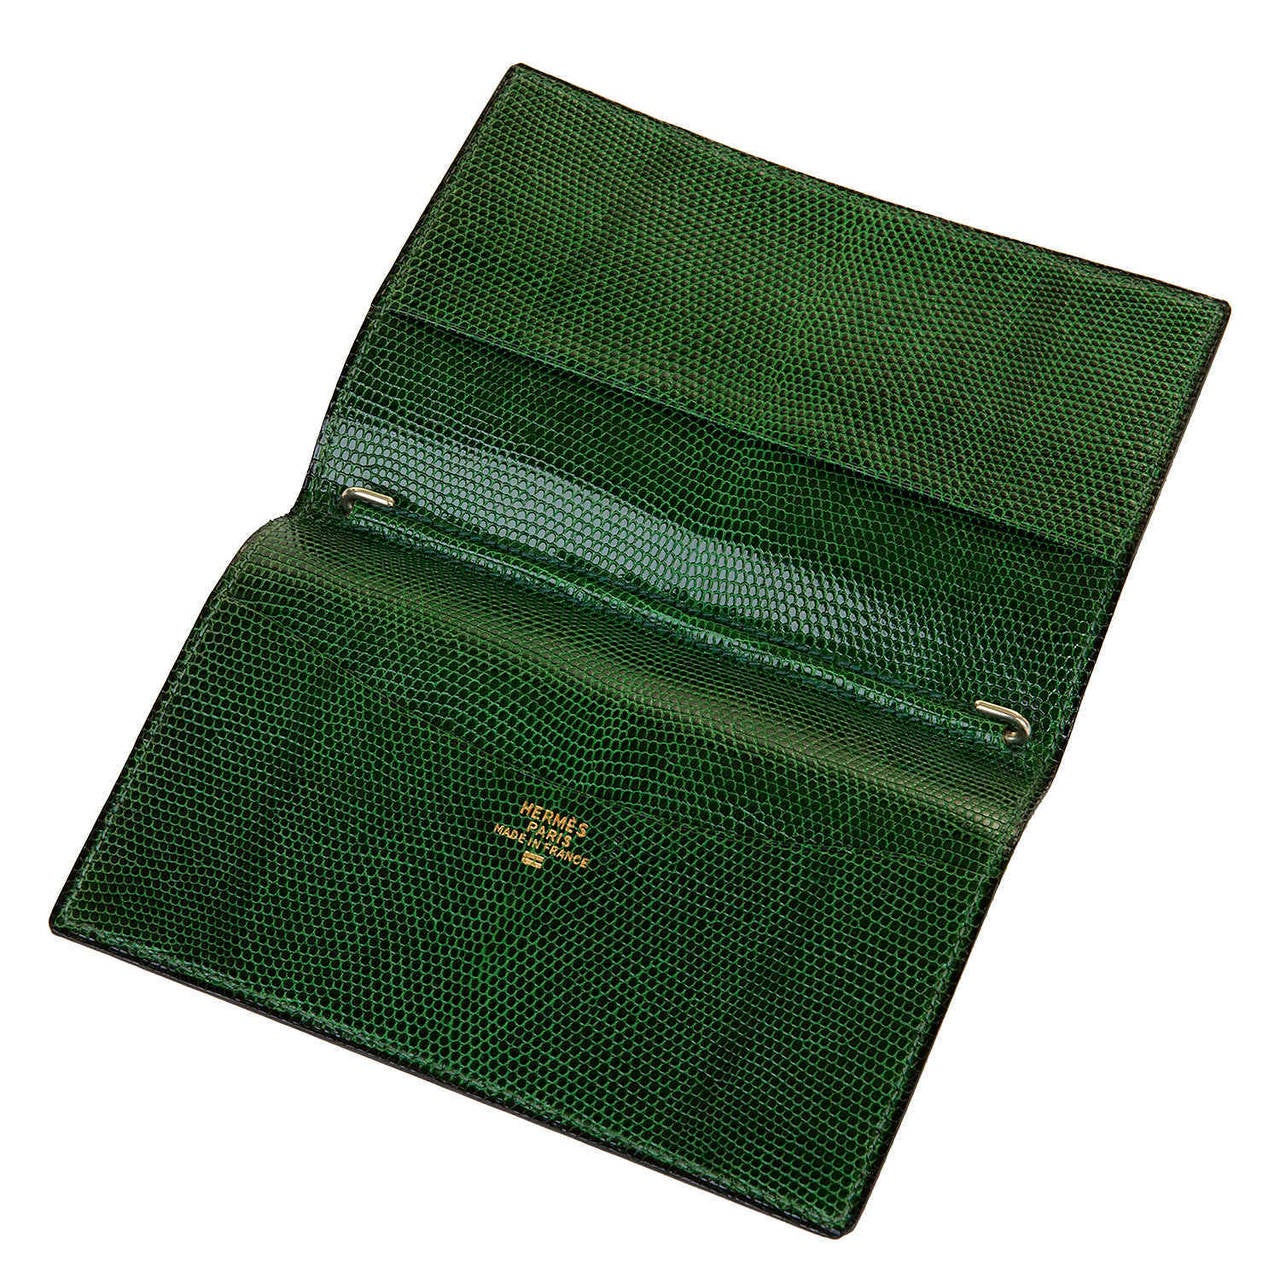 This Hermes 'Porte Agenda' - note book cover, in Green Lizard, is in 'New' condition and is a perfect accessory for most handbags & clutches. Bearing the Hermes signature stamp, in gold-leaf, to the interior, it is a charming Hermes piece.

FREE